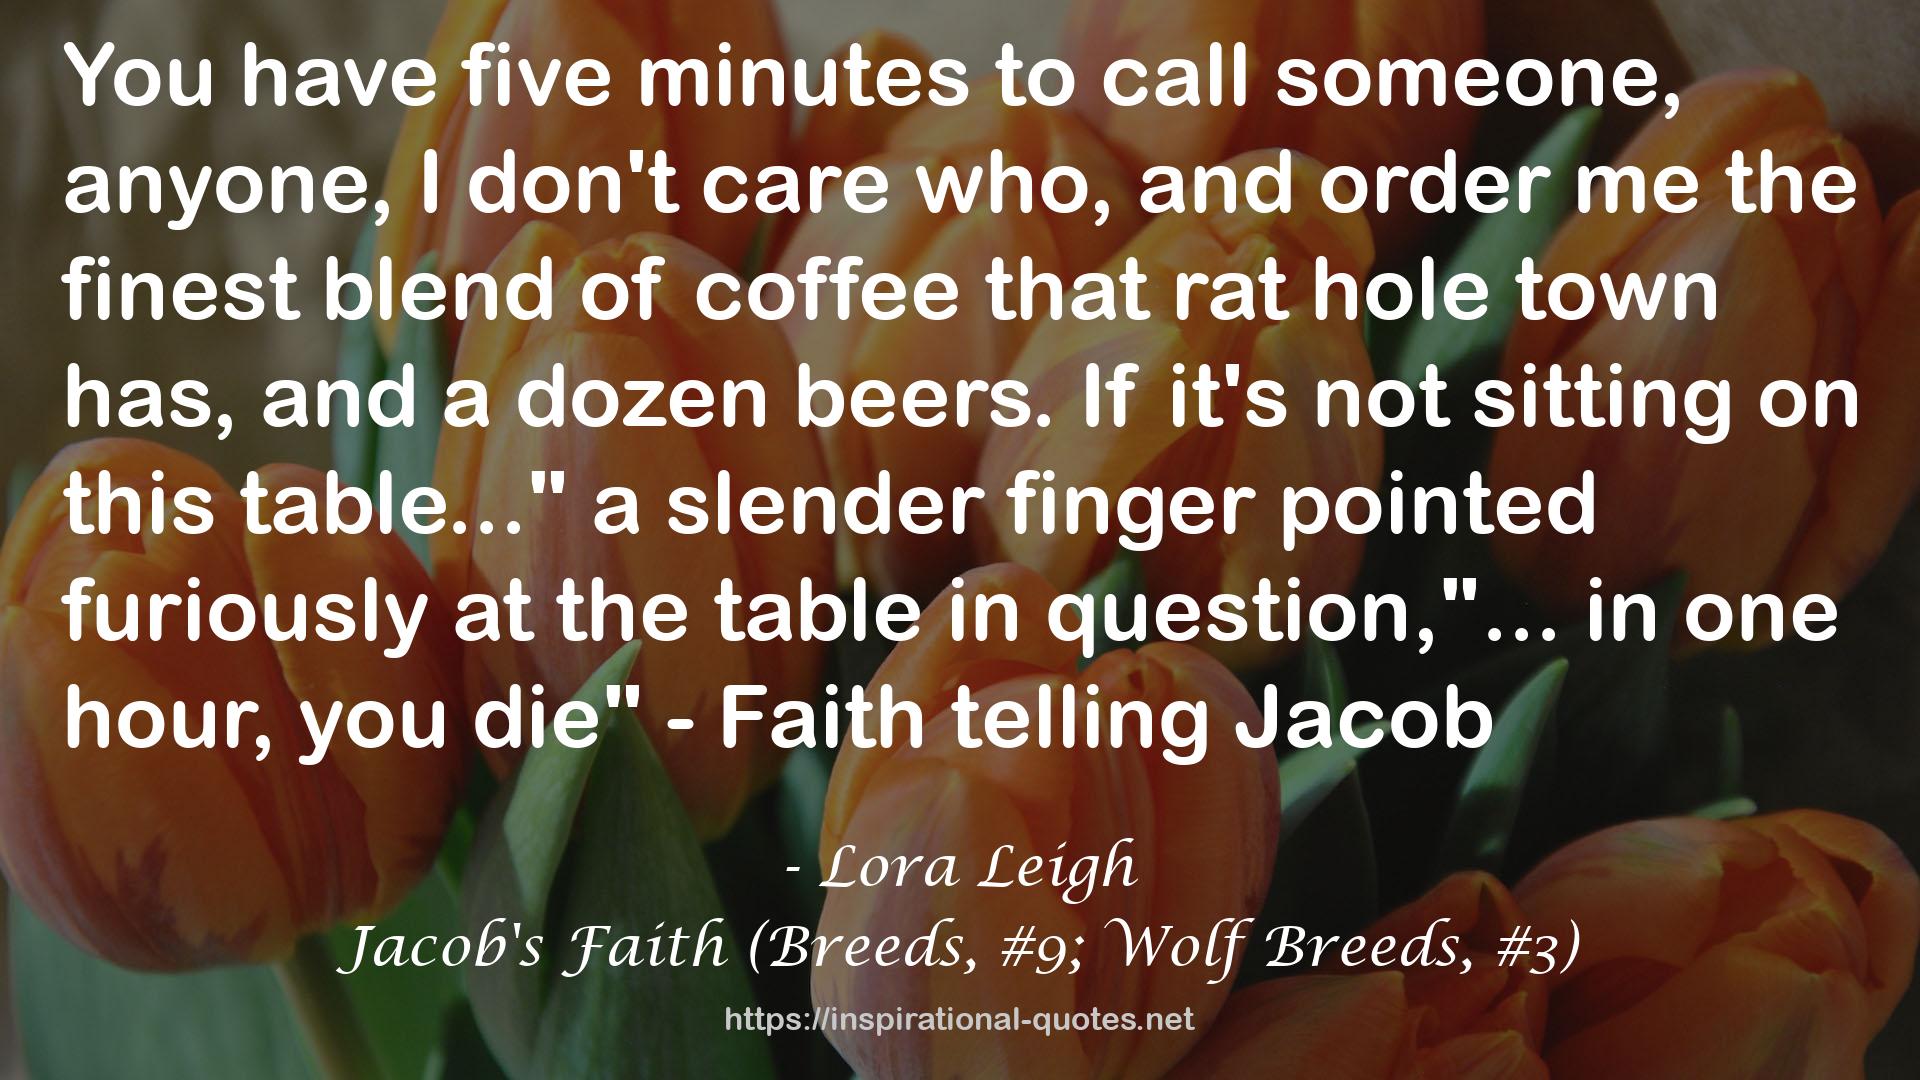 Jacob's Faith (Breeds, #9; Wolf Breeds, #3) QUOTES